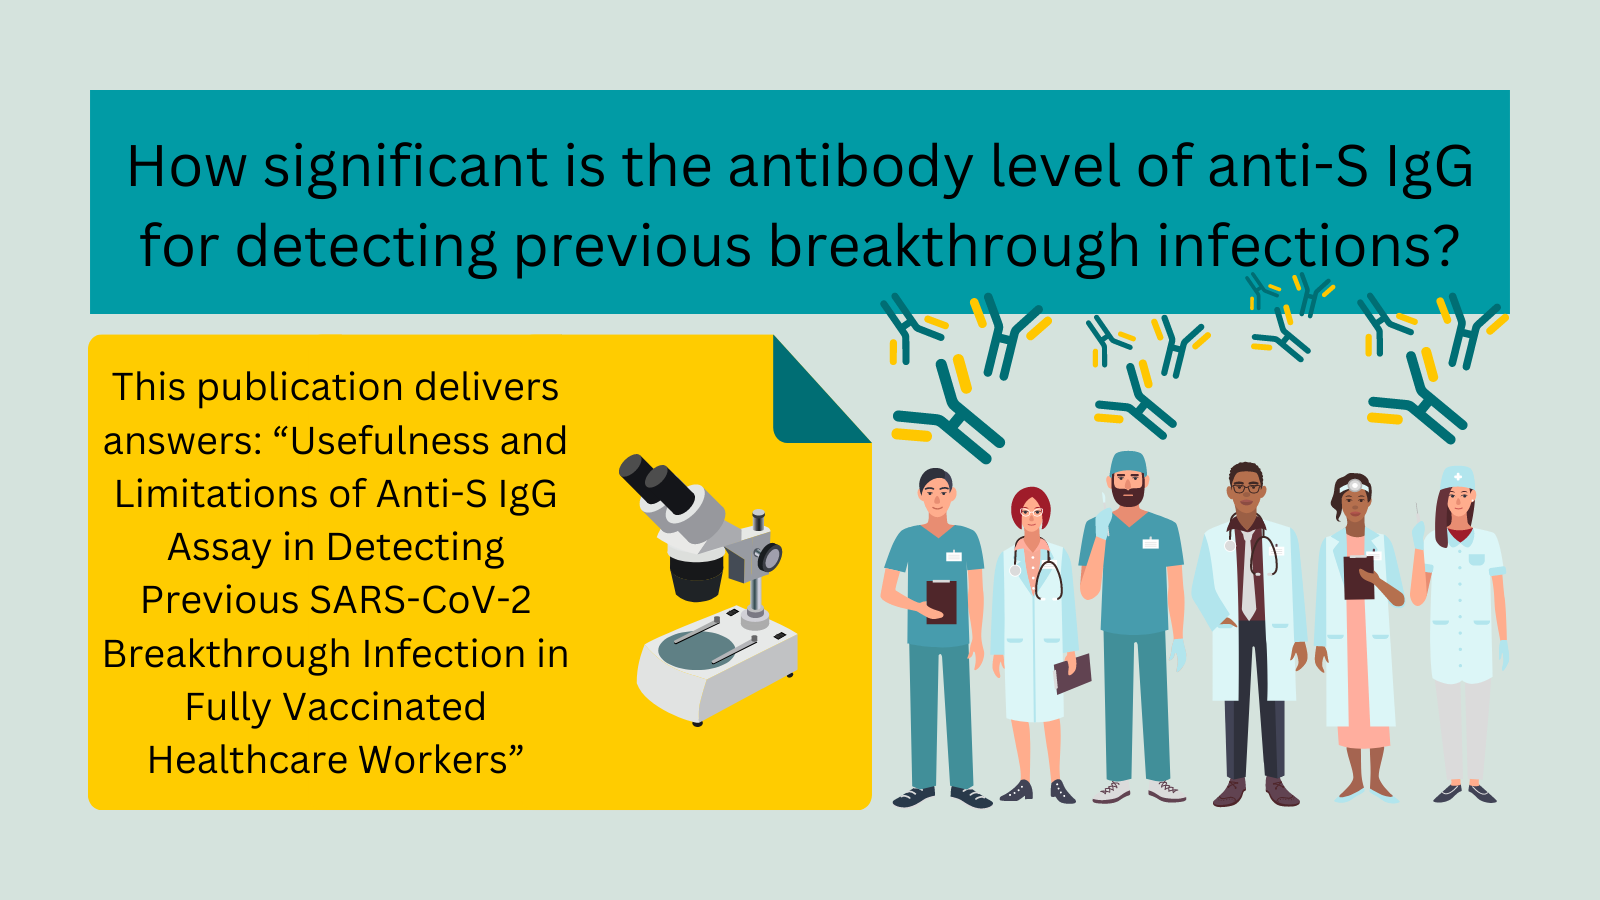 How significant is the antibody level of anti-S IgG for detecting previous breakthrough infections?